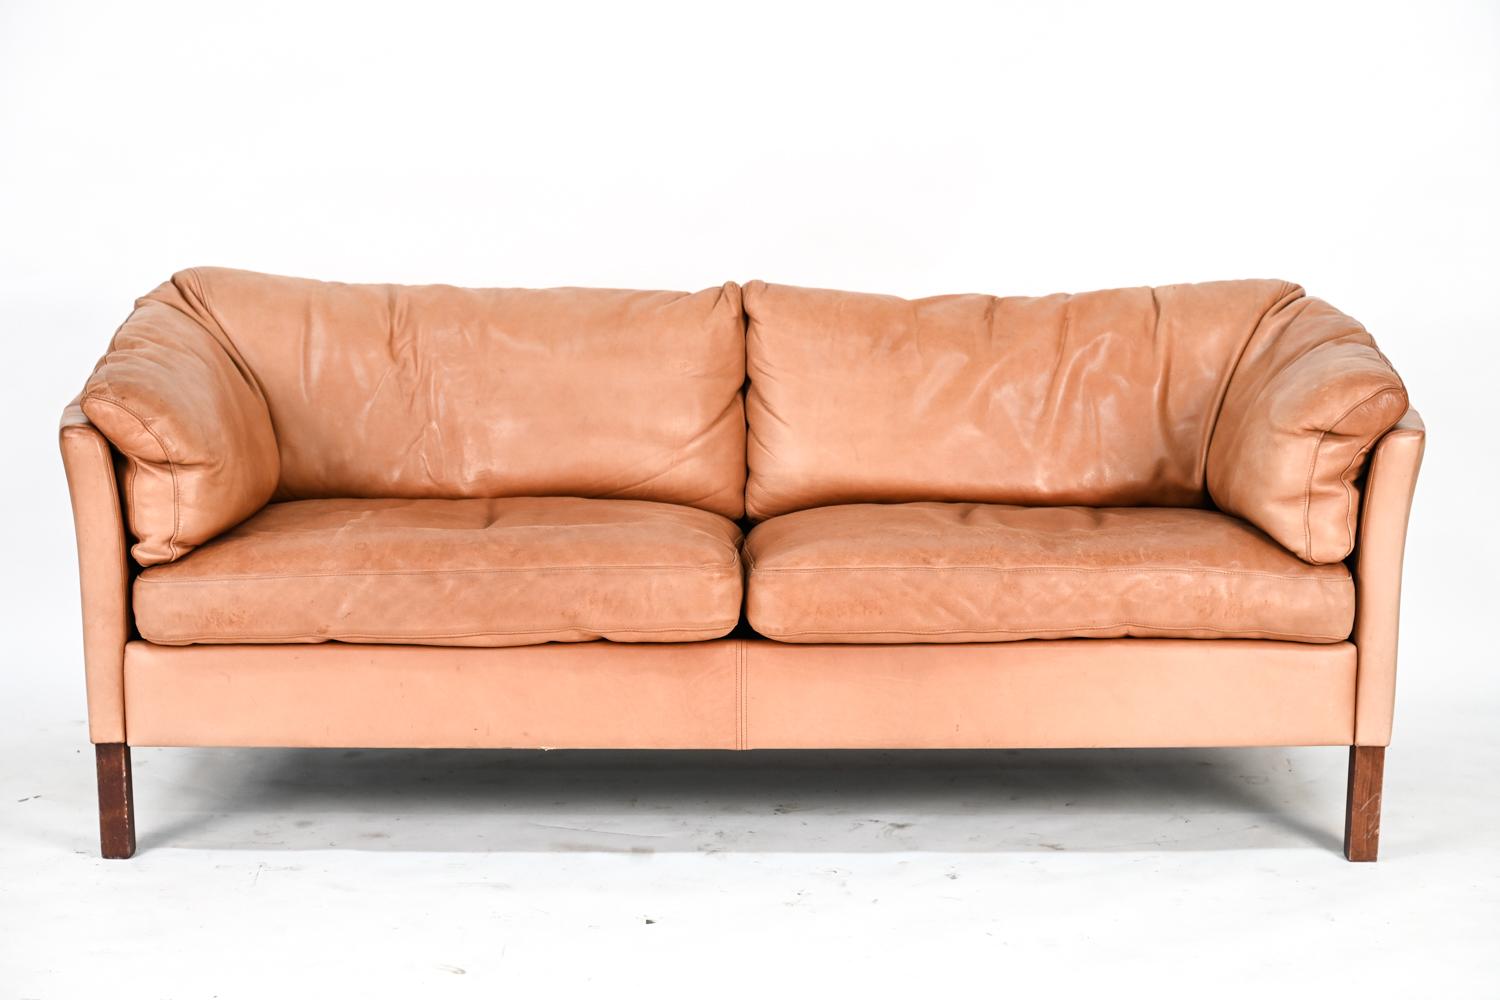 A stylish pair of Danish mid-century sofas by Mogens Hansen upholstered in handsomely patinated brandy leather.